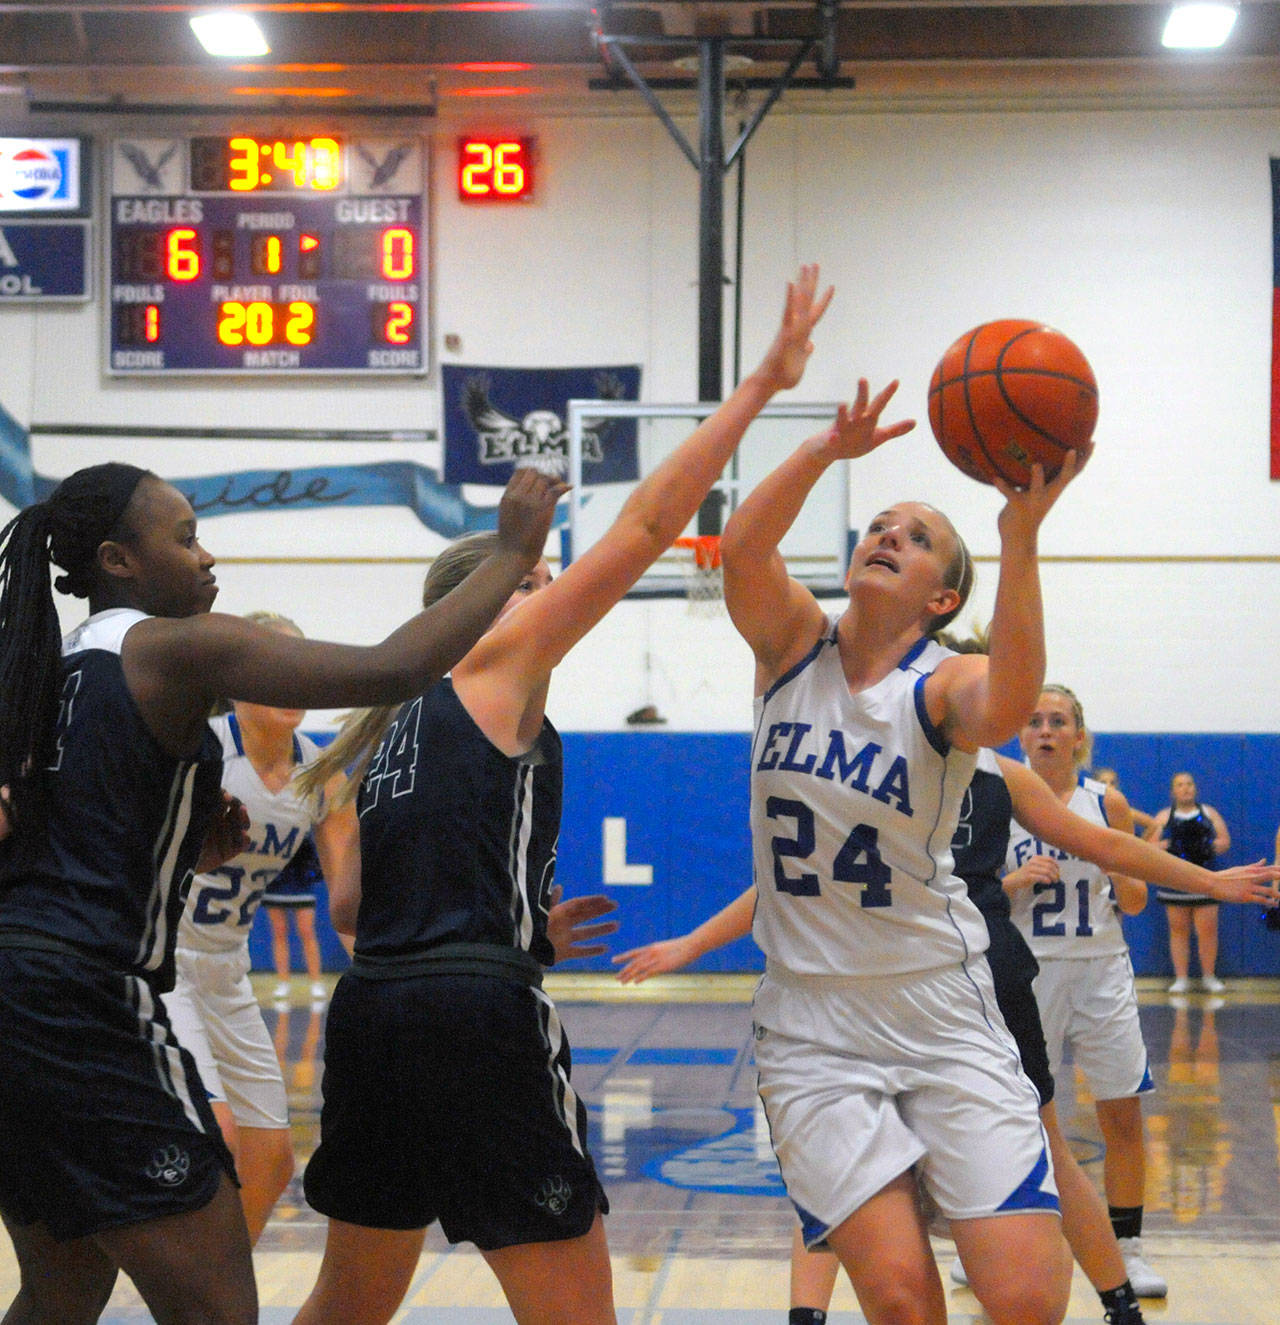 Elma’s Molly Johnston (24) drives to the paint against Cascade Christian on Tuesday. Johnston left the game in the first quarter after sustaining an ankle injury. (Hasani Grayson | Grays Harbor News Group)